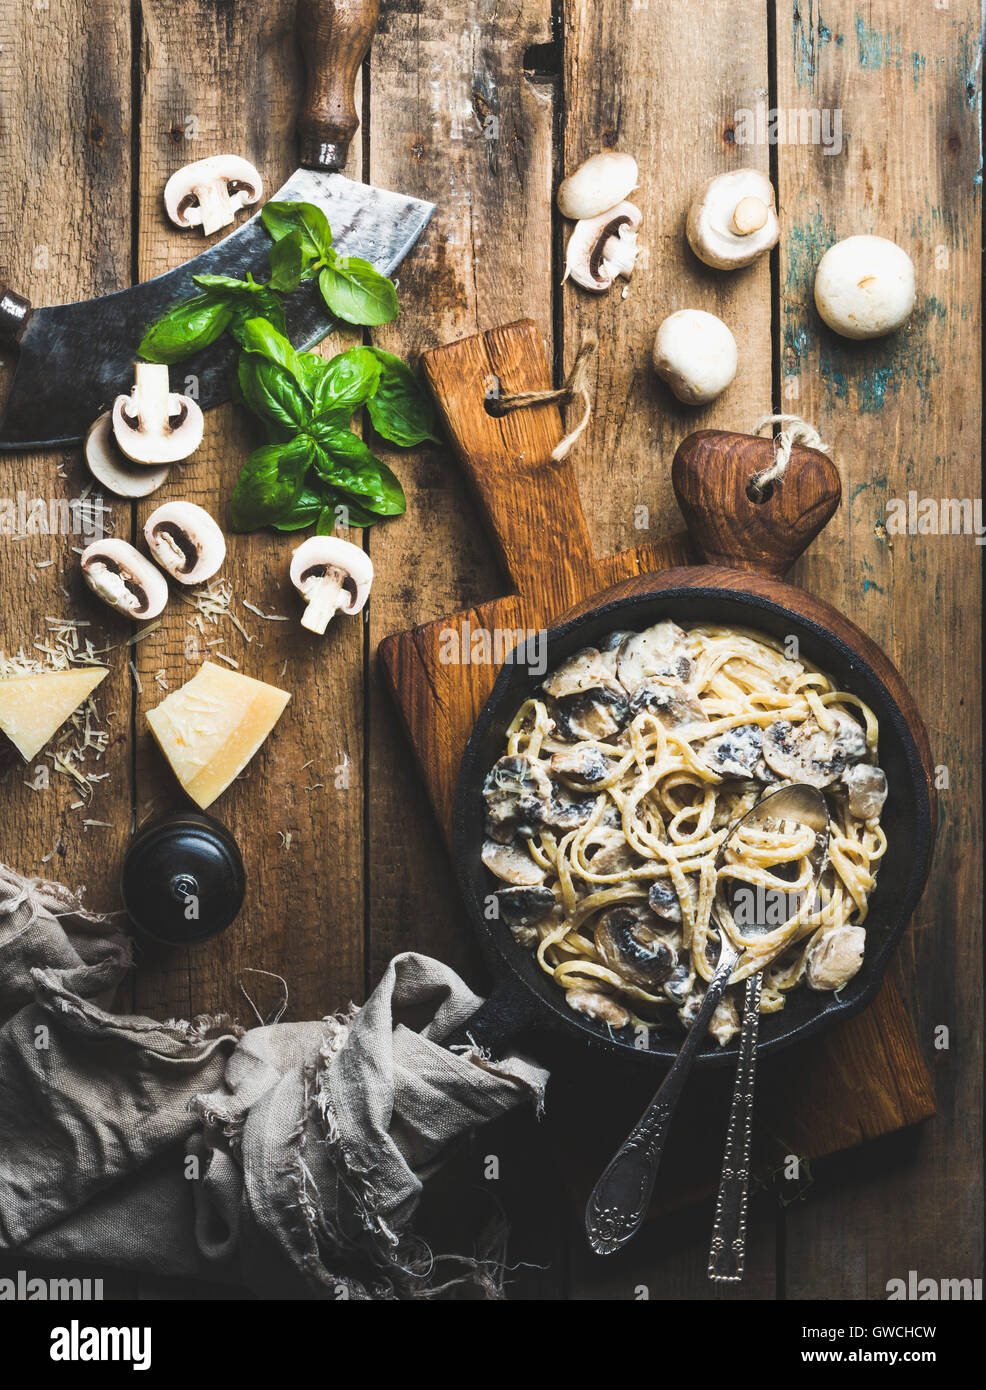 Italian style dinner. Creamy mushroom pasta spaghetti in cast iron pan on wooden boards with Parmesan cheese, fresh basil leaves Stock Photo